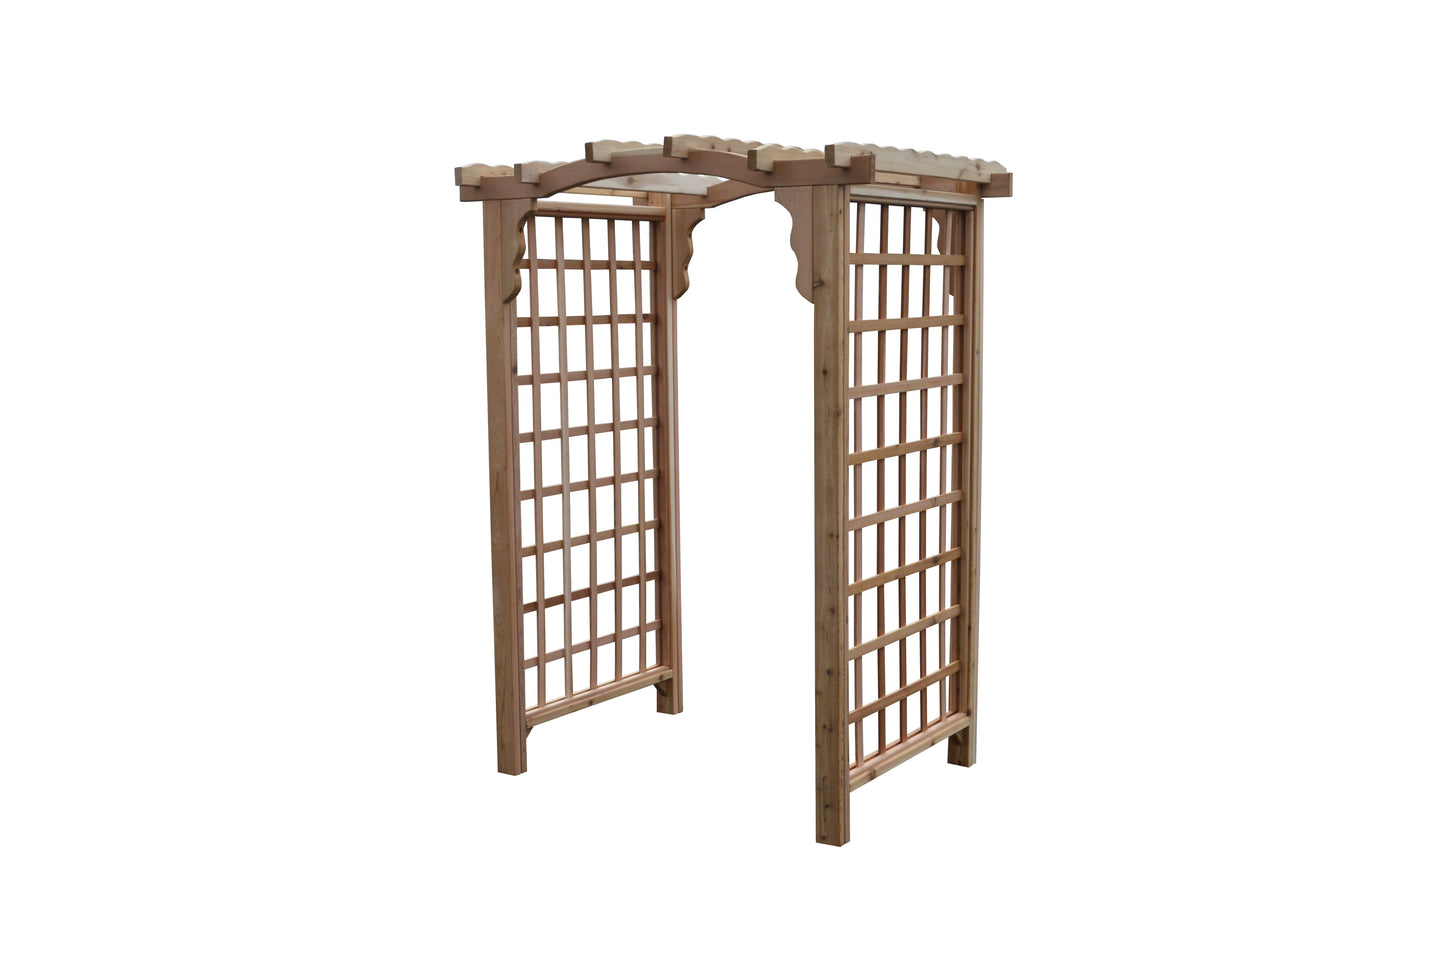 A&L Furniture Co. Western Red Cedar 4' Cambridge Arbor - LEAD TIME TO SHIP 2 WEEKS